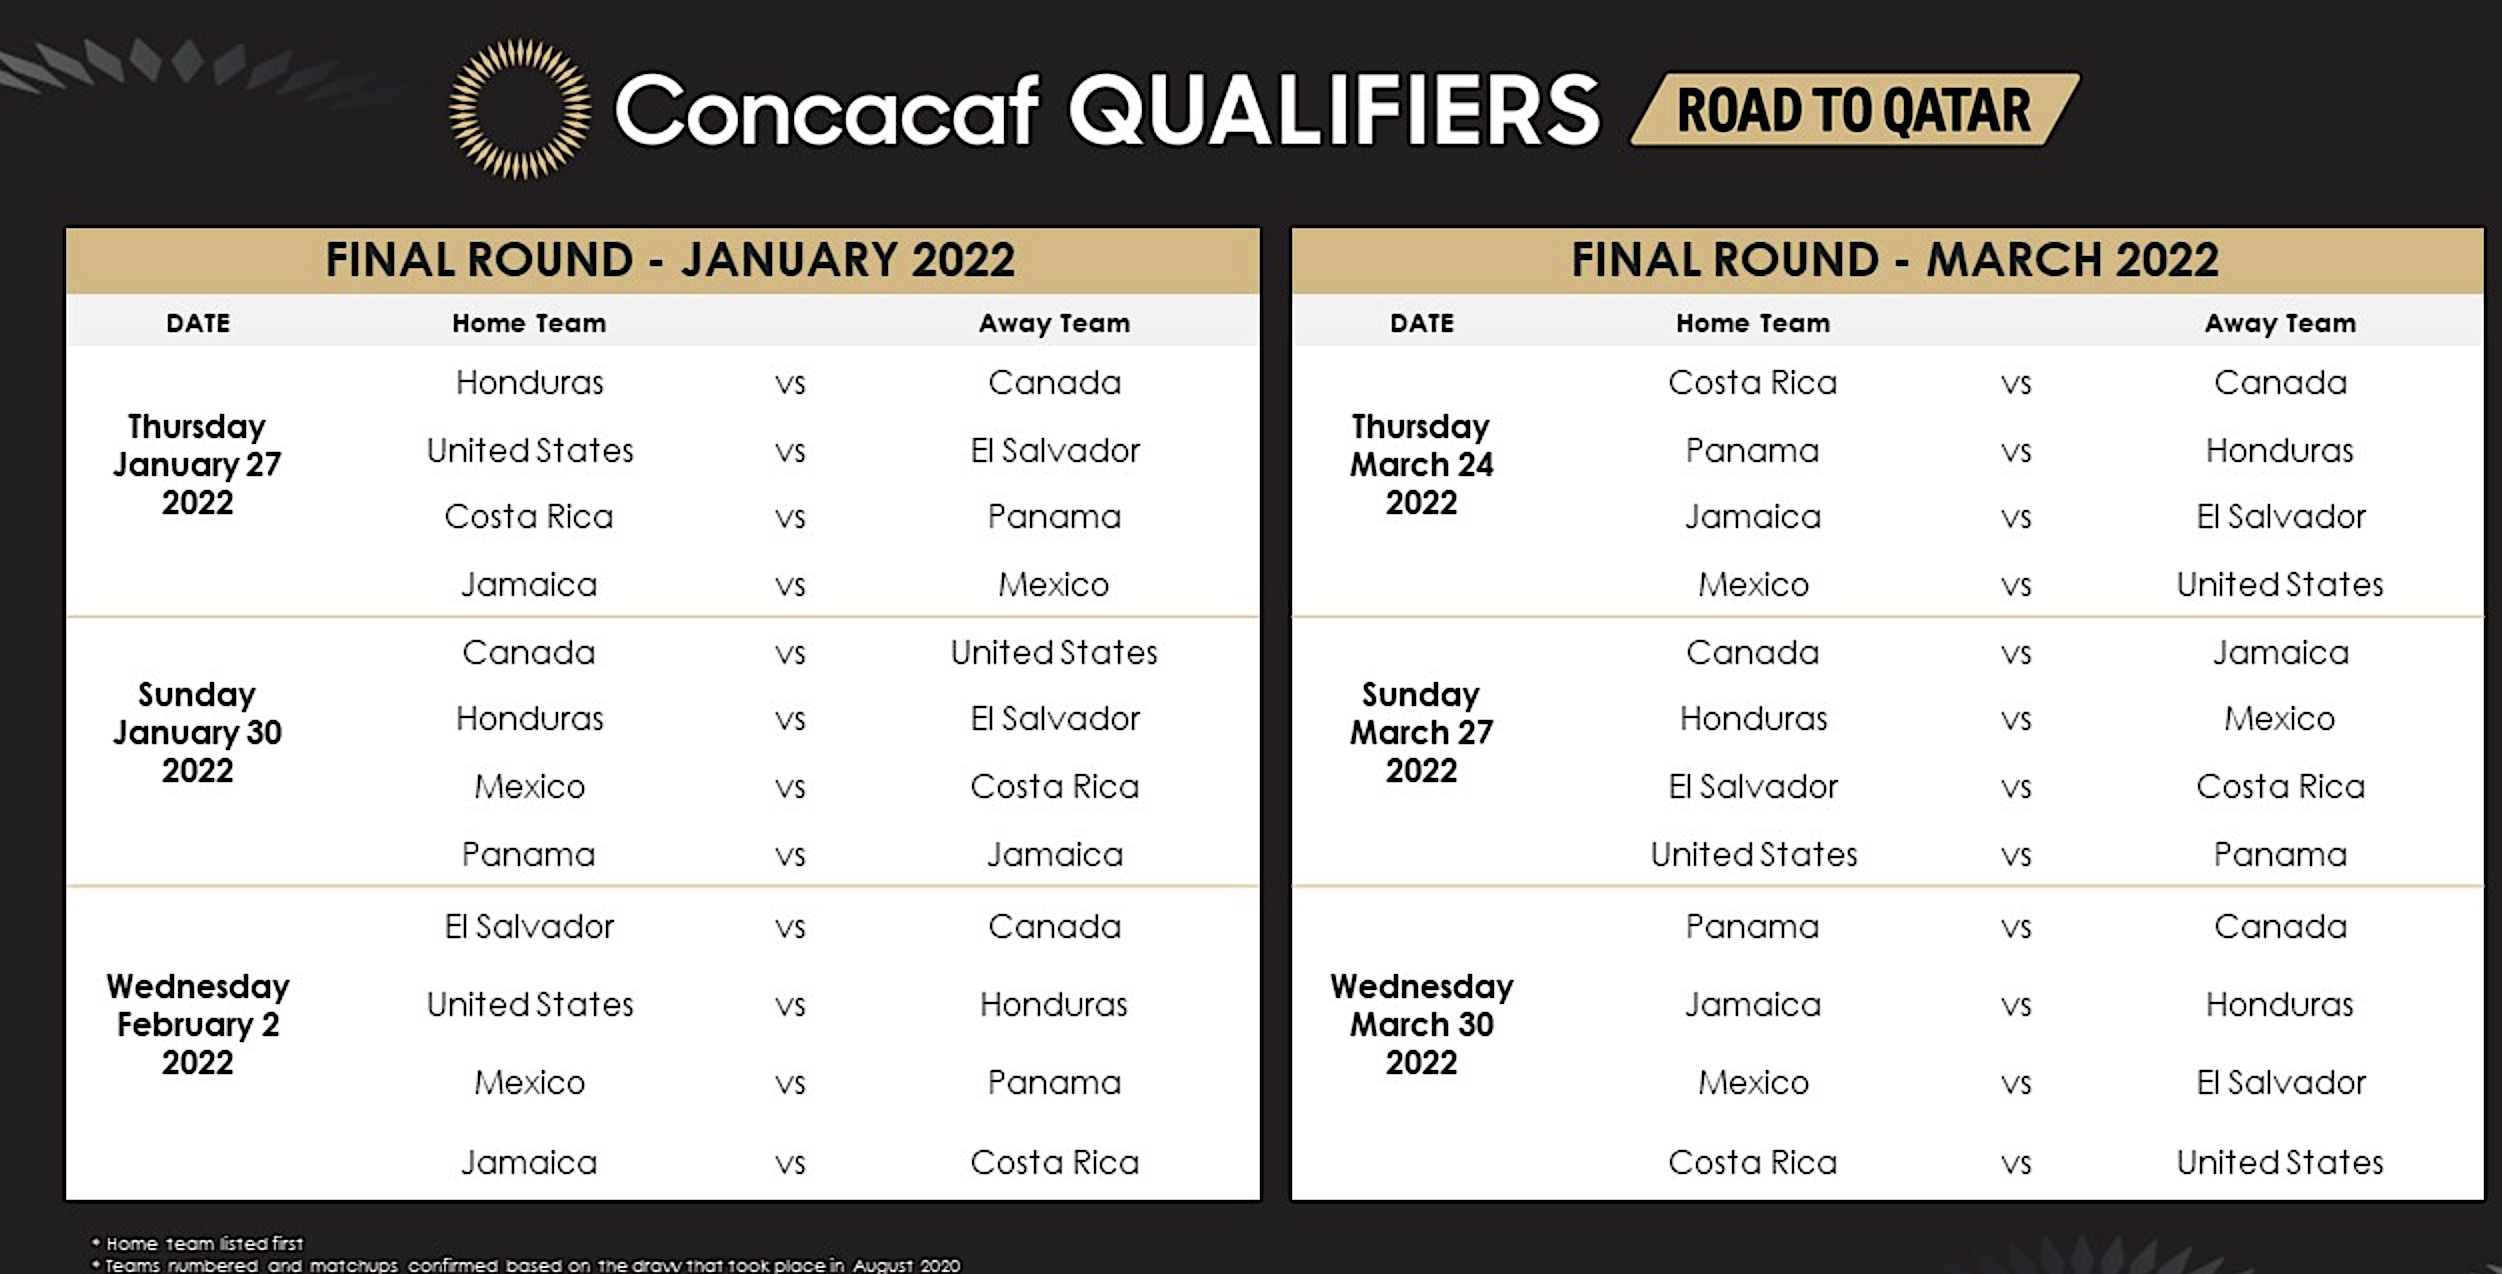 Concacaf and FIFA confirm schedule for November’s Final Round matches